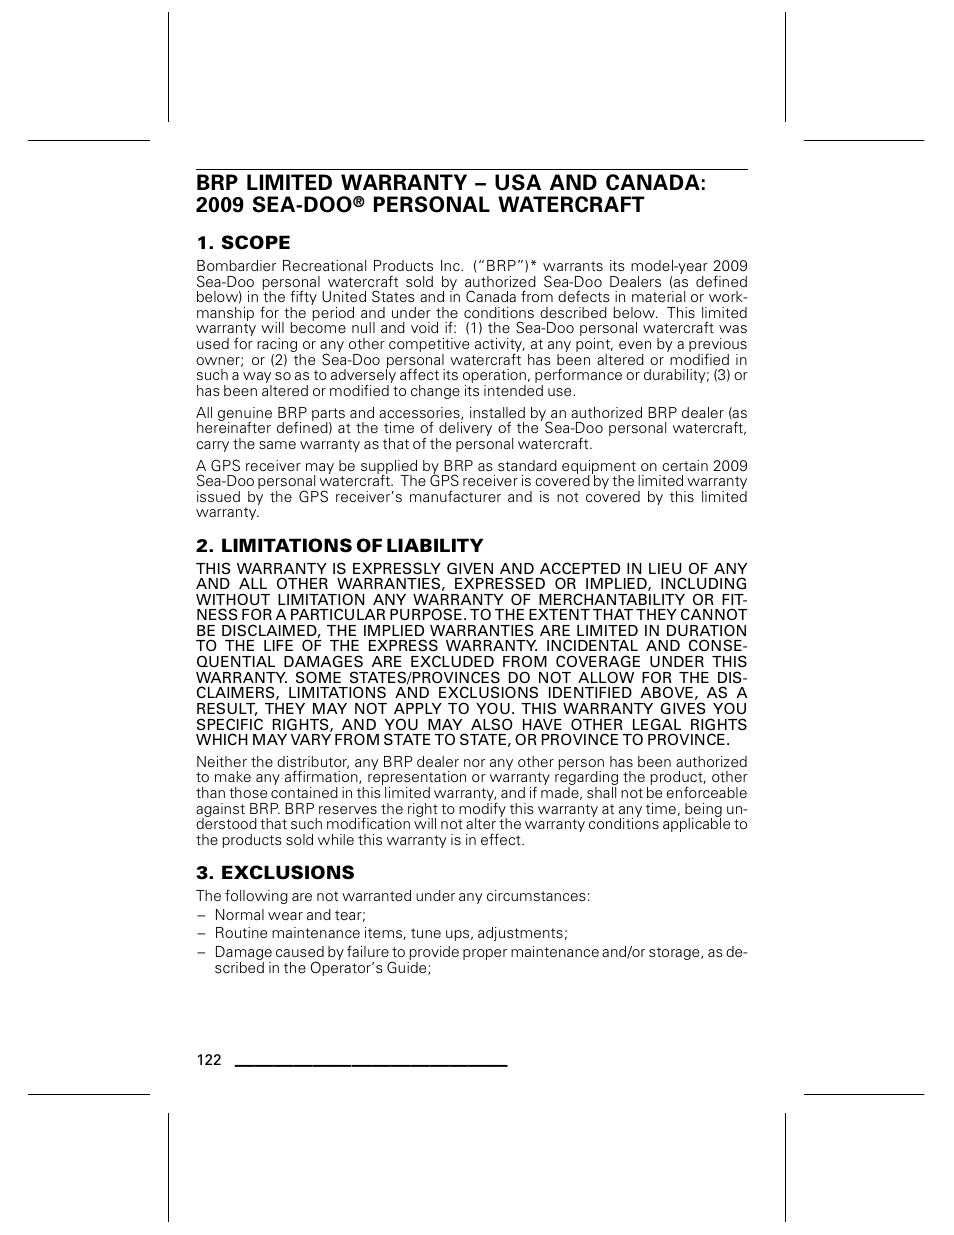 Scope, Limitations of liability, Exclusions | Ski-Doo WAKE Series User Manual | Page 124 / 148